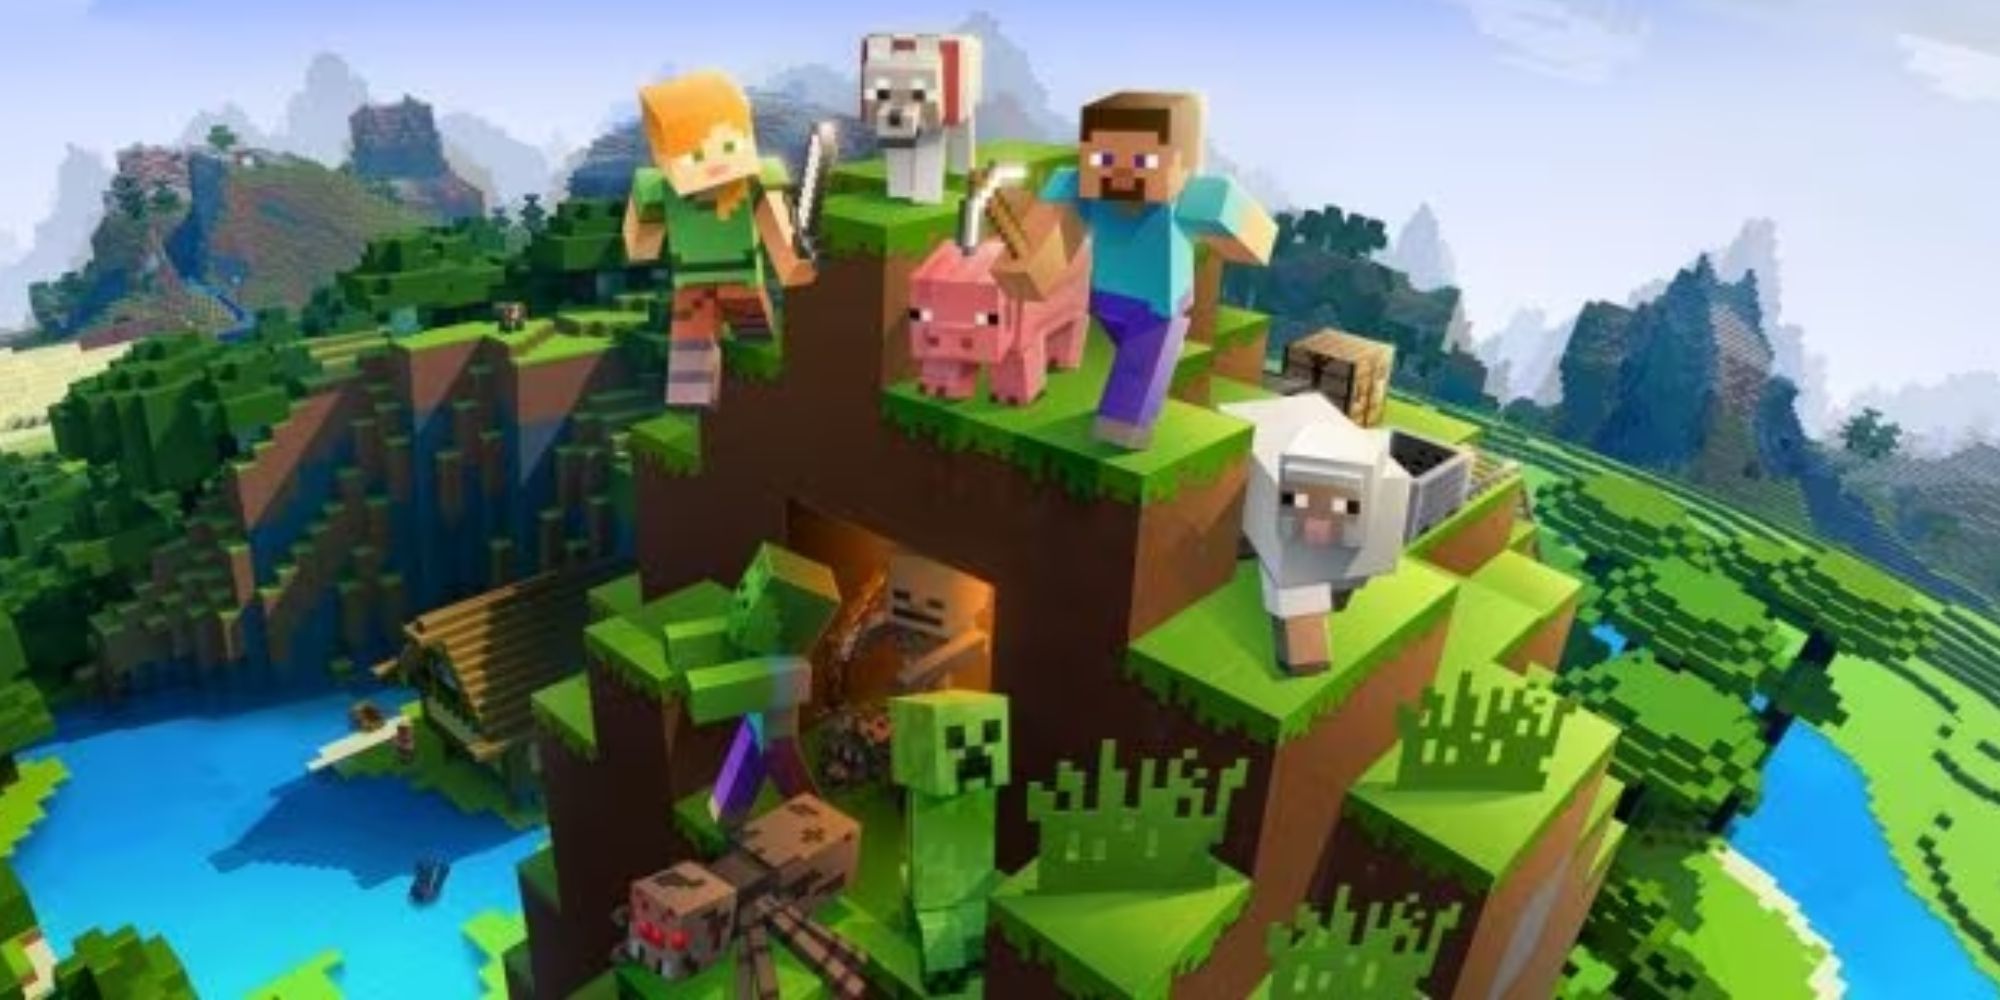 Minecraft system requirements